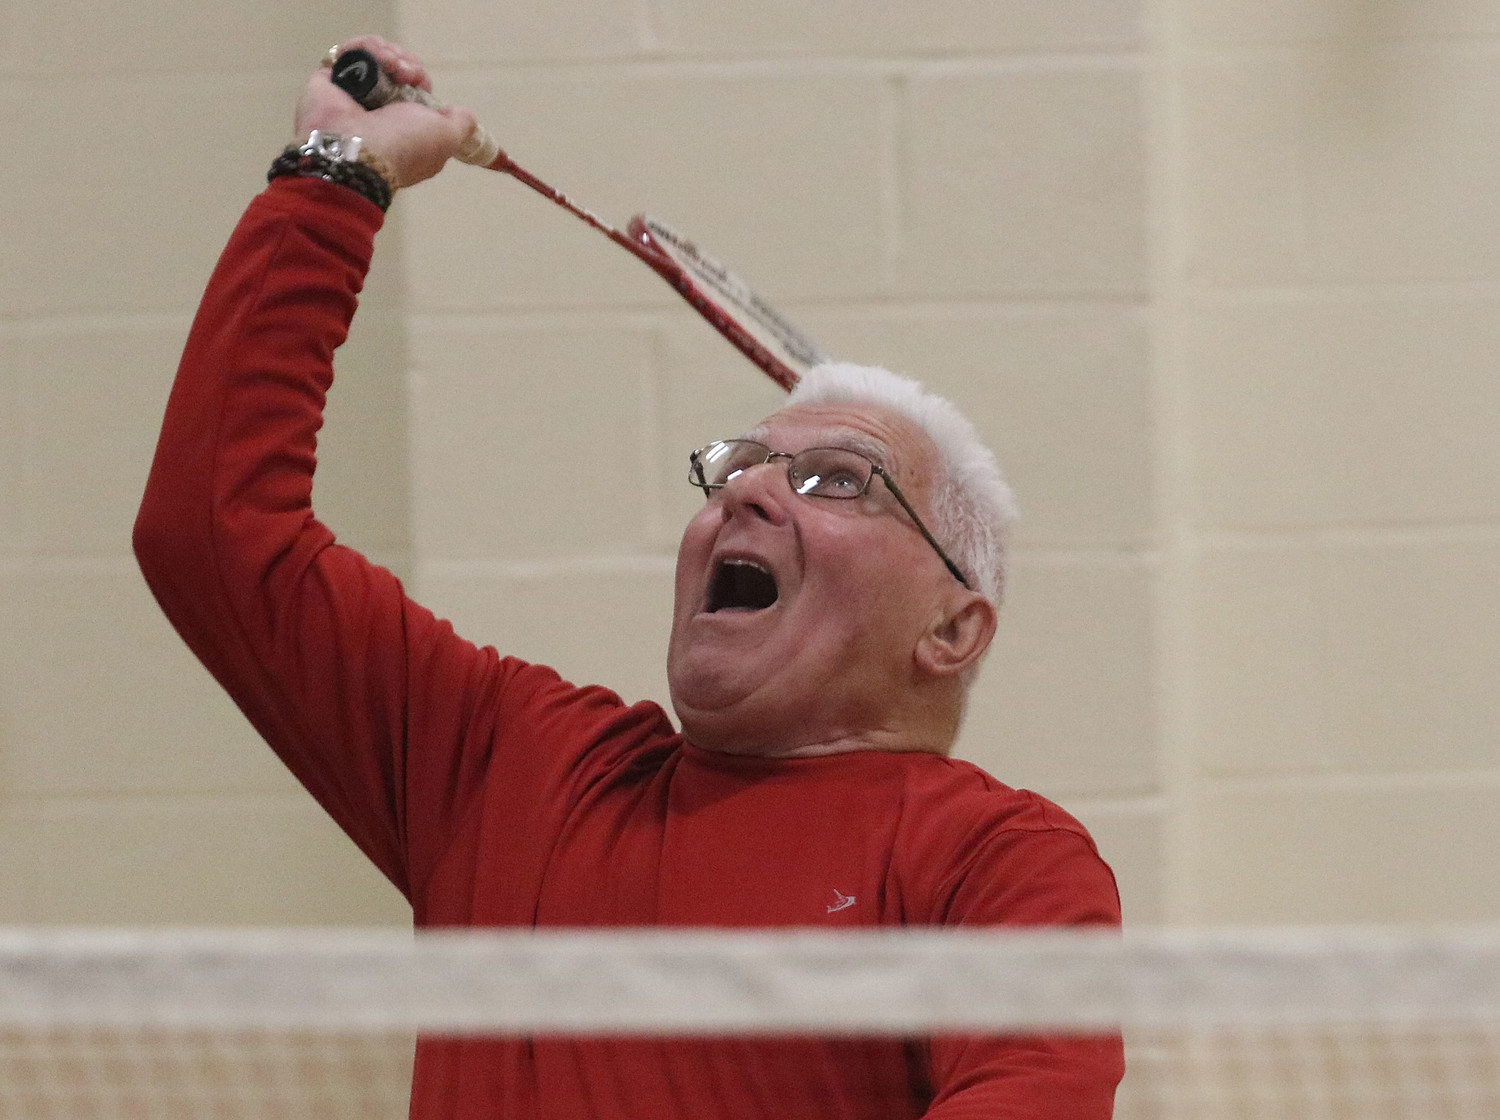 Bob Costa winds-up to slam a shot over the net during a friendly match at the Bristol Community Center on Tuesday night.